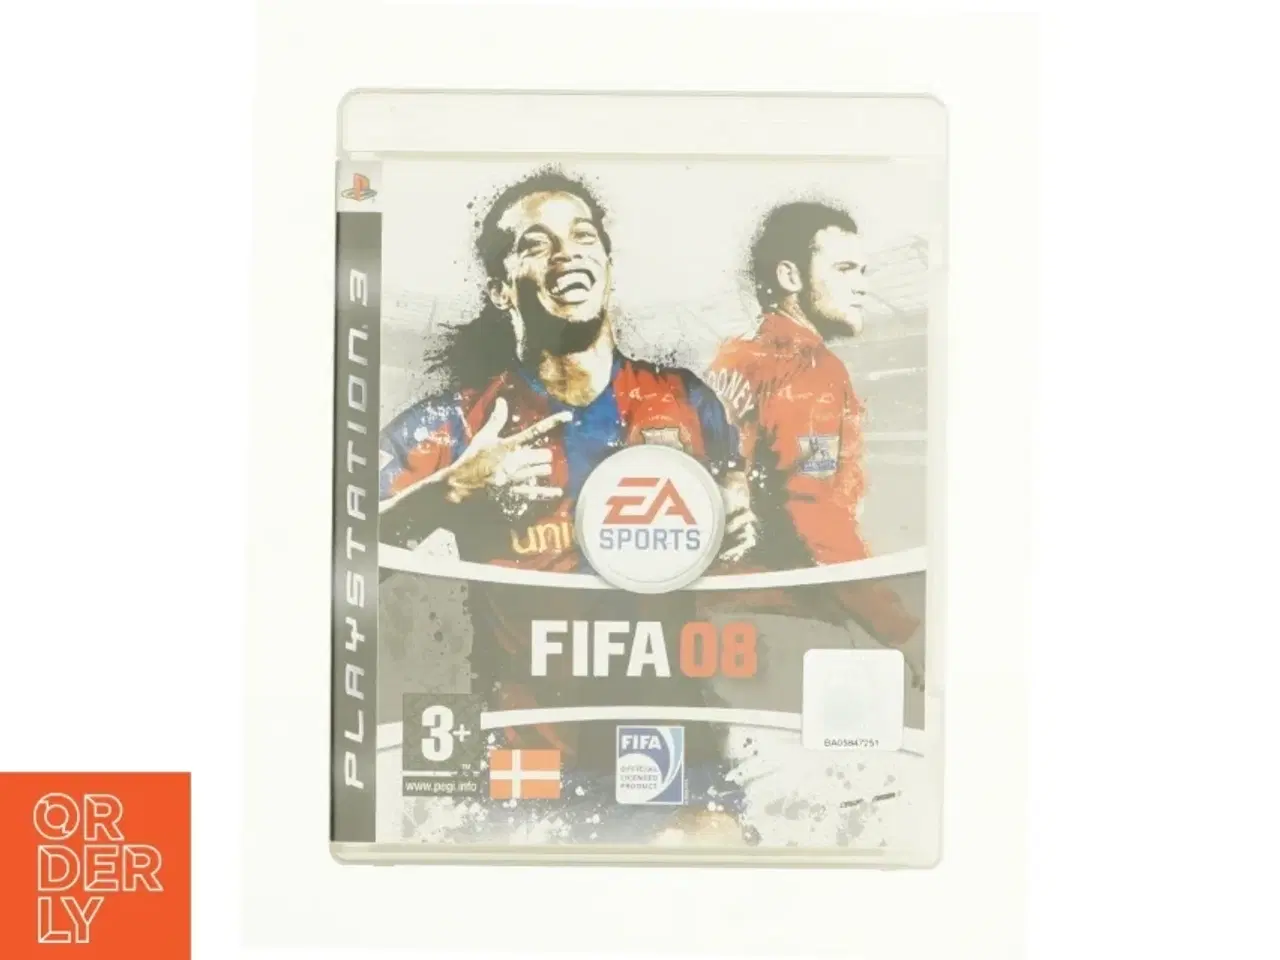 Billede 1 - FIFA 08 (Playstation 3) English in Game Speech and Text, Dansk Manual fra DVD